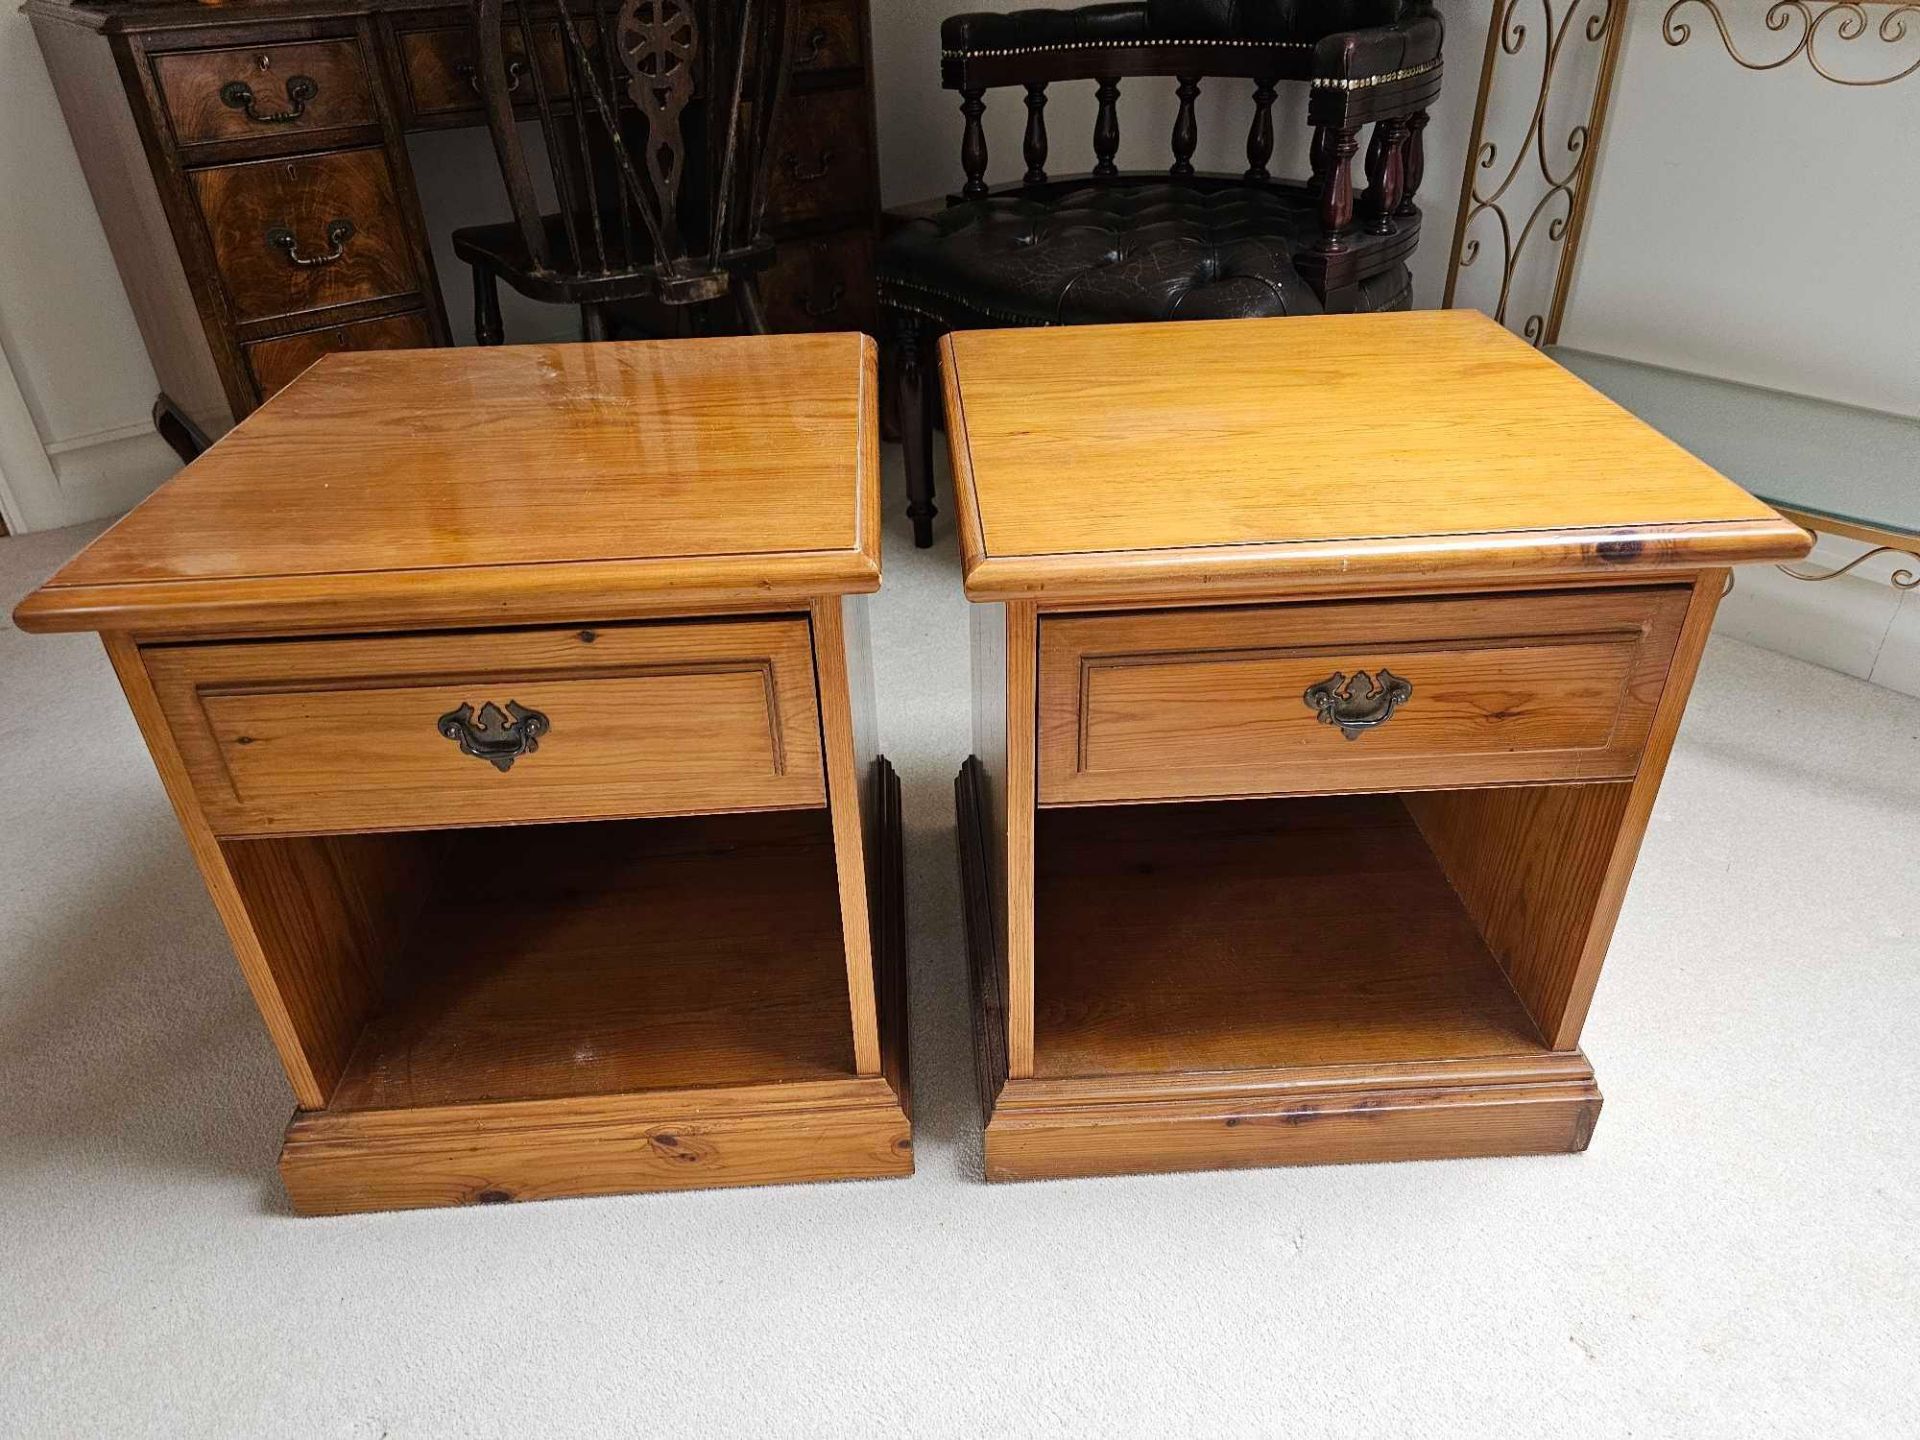 A Pair Of Younger Furniture Single Drawer Bedside Chests In Cherrywood 48 X 47 X 53cm A Younger - Image 2 of 6